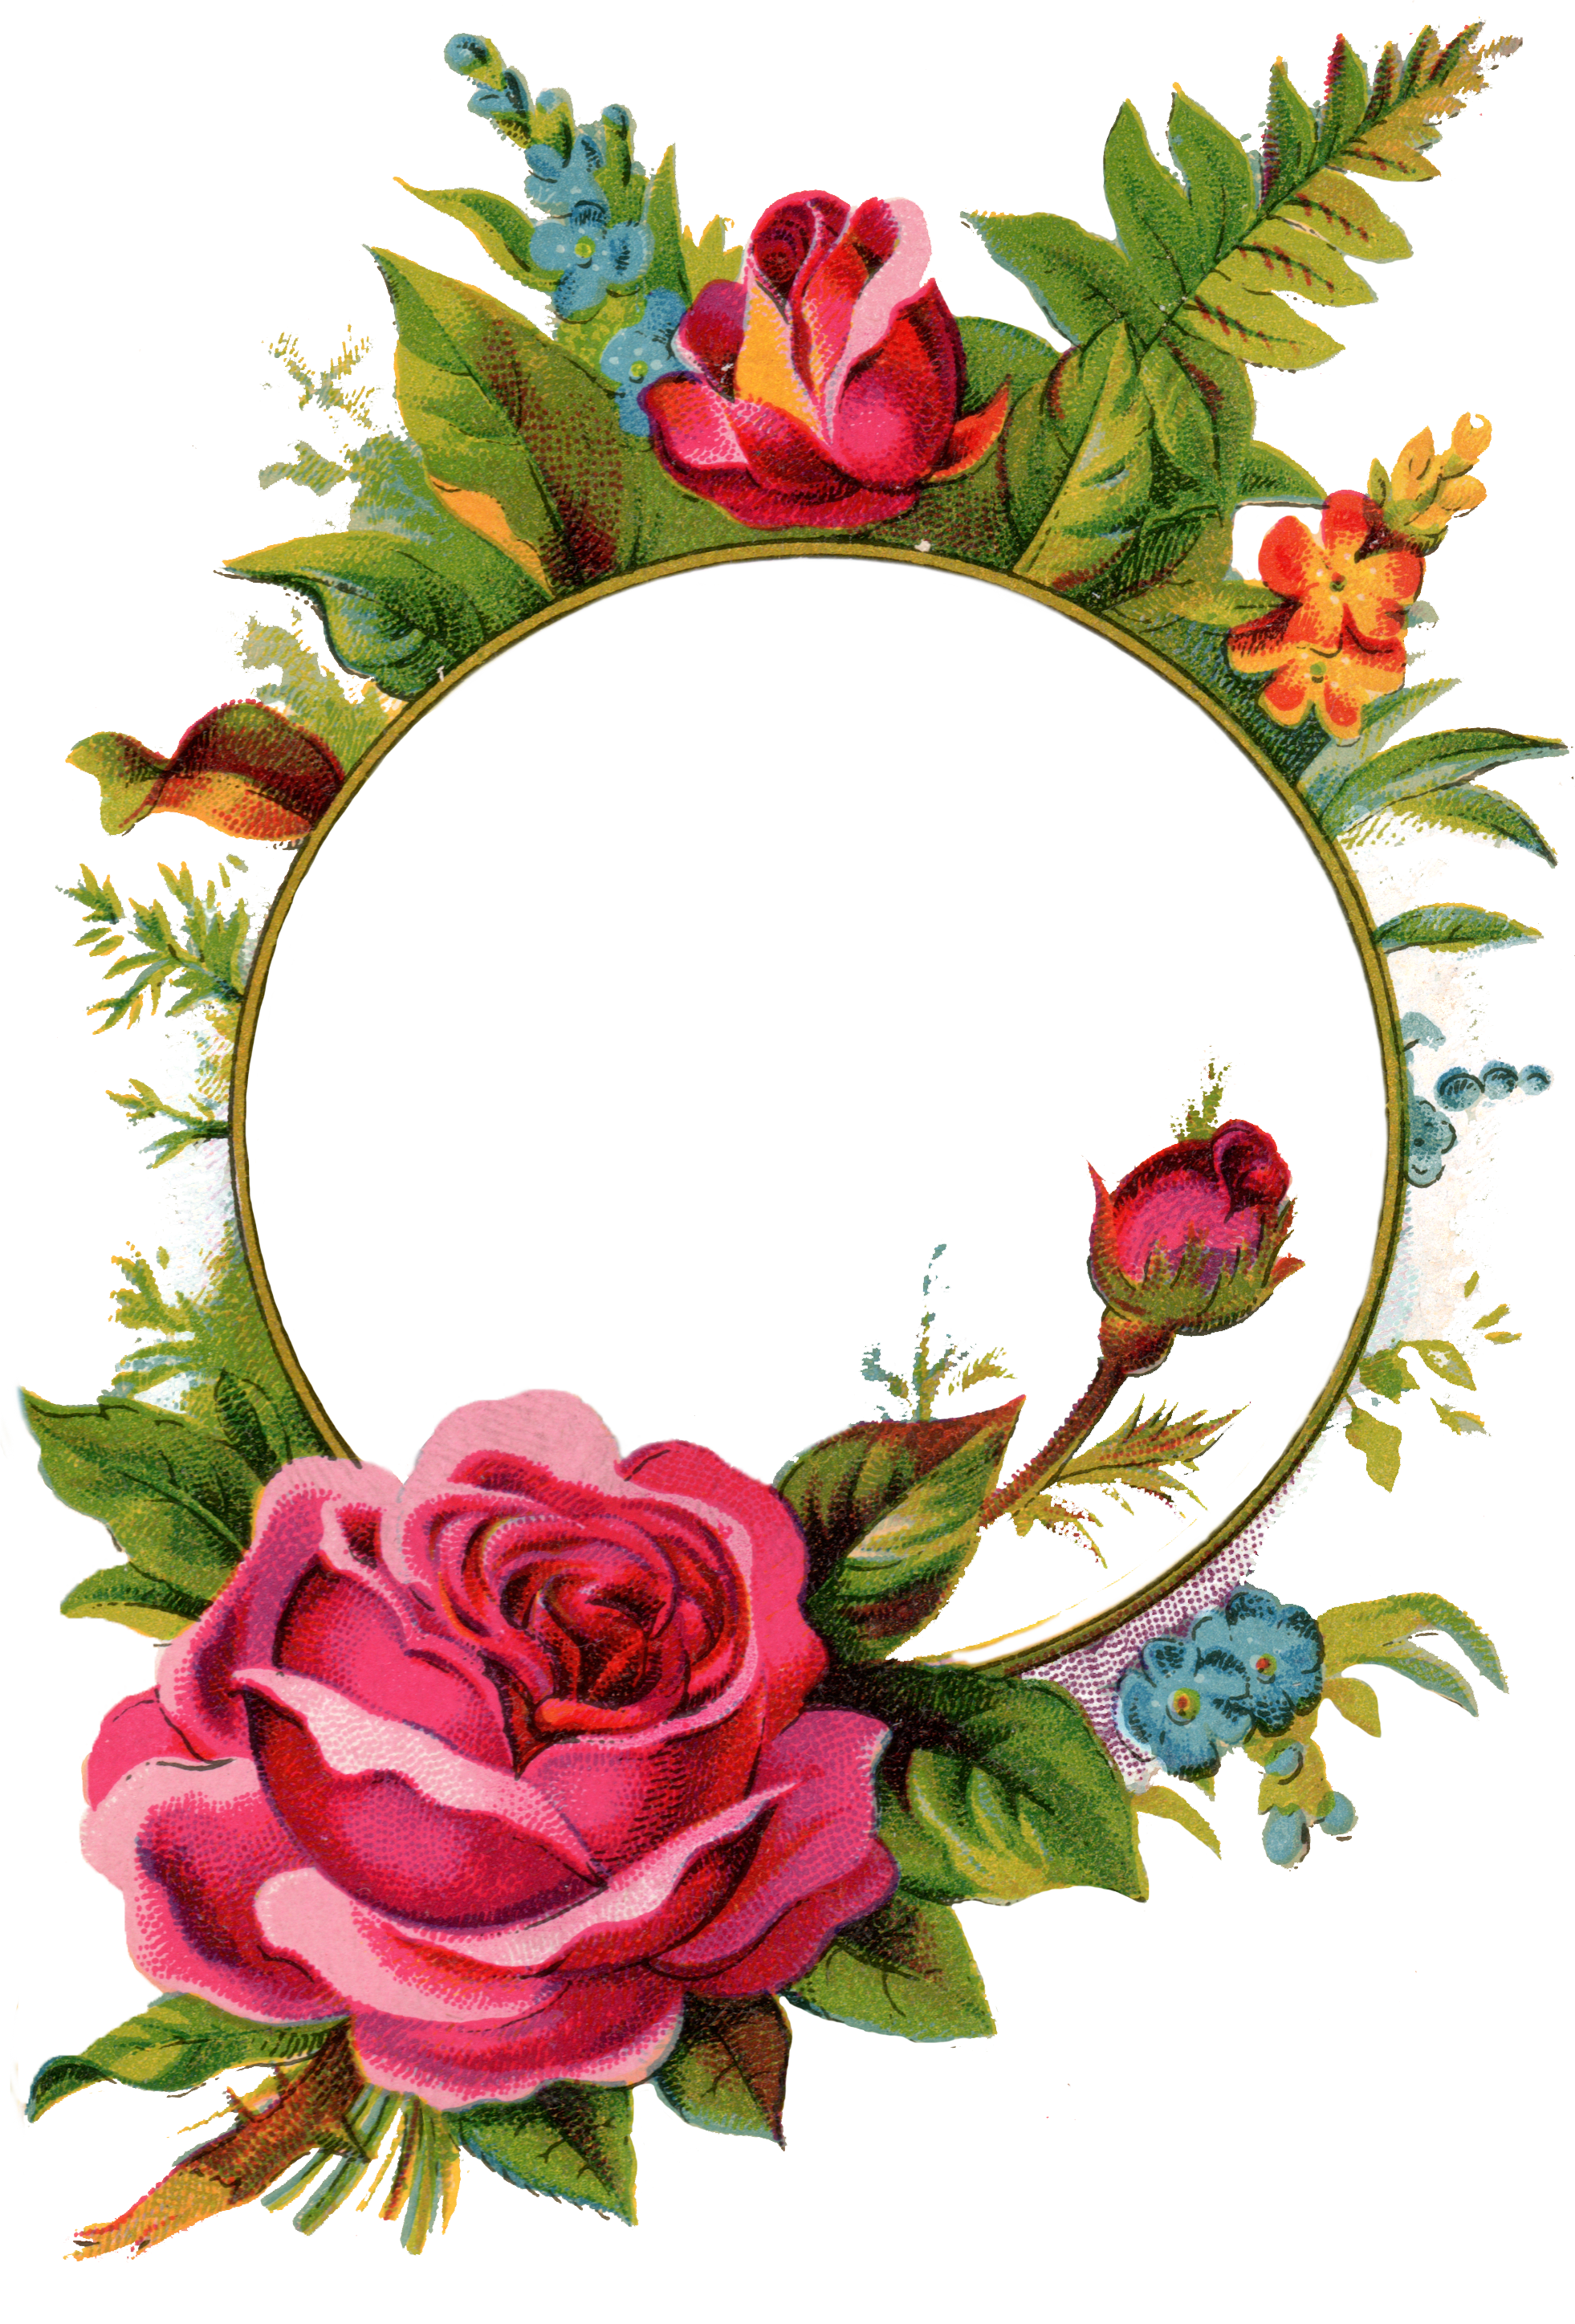 Engagement clipart rose. Free stock images frame